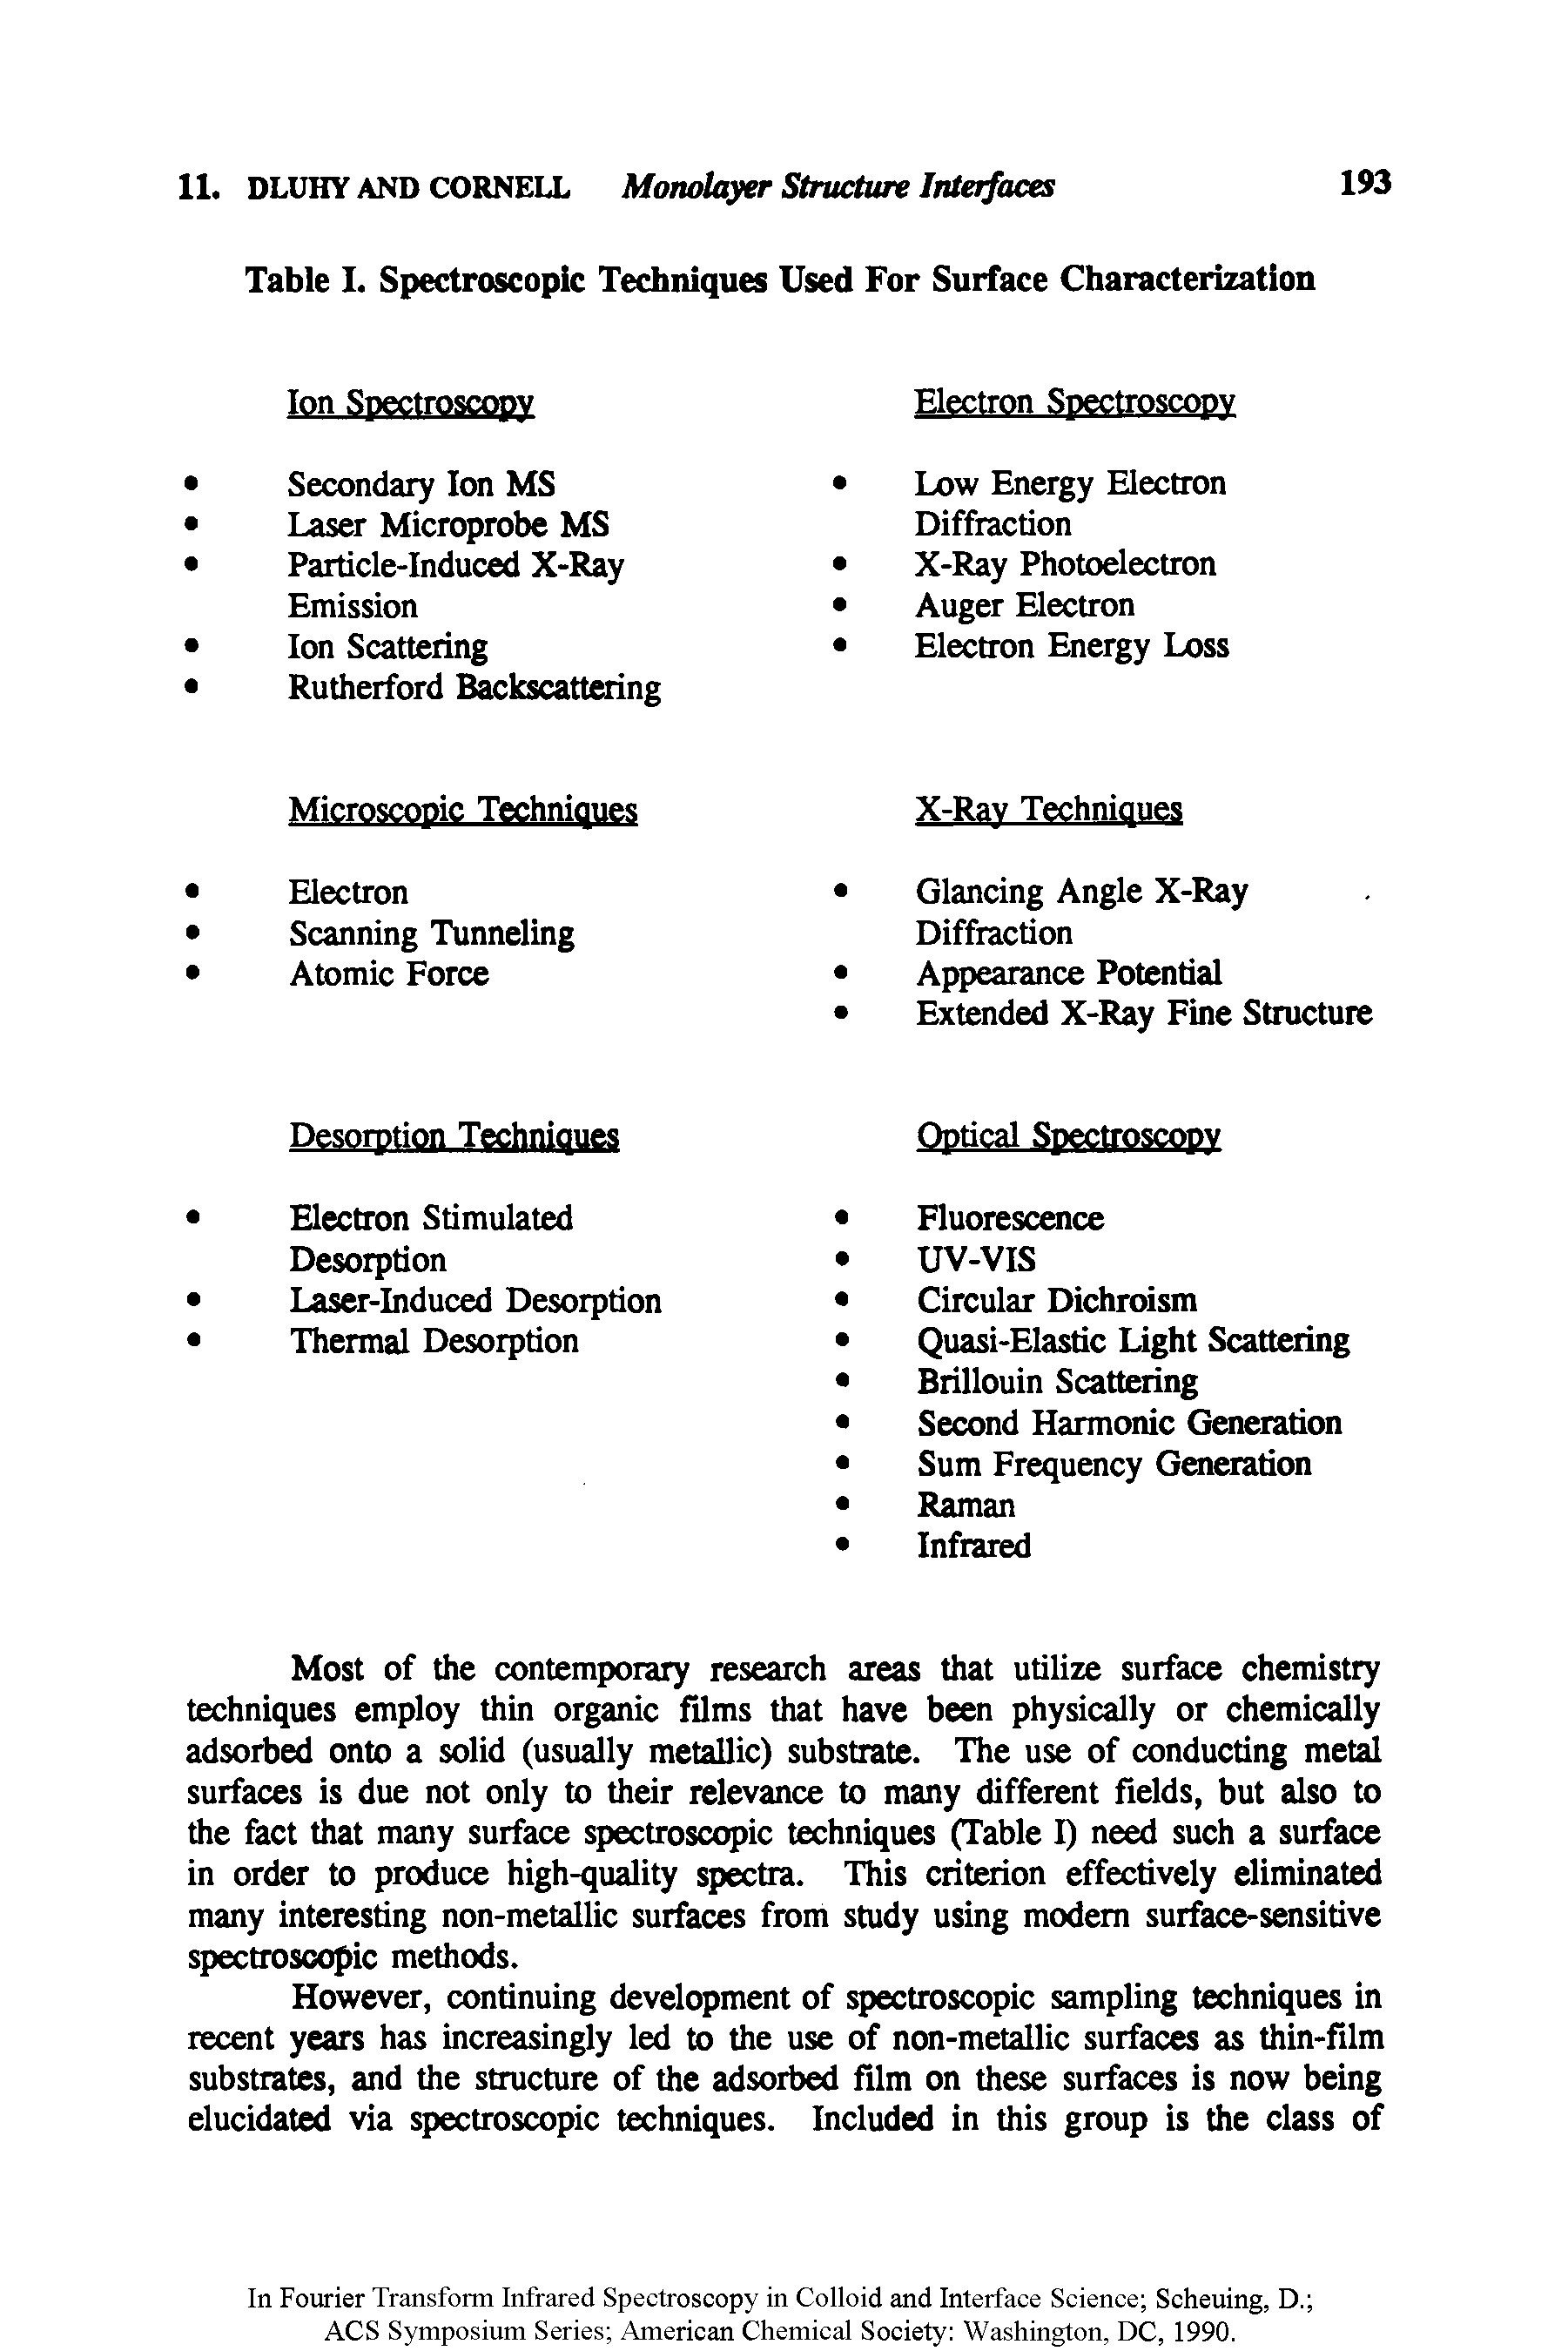 Table I. Spectroscopic Techniques Used For Surface Characterization...